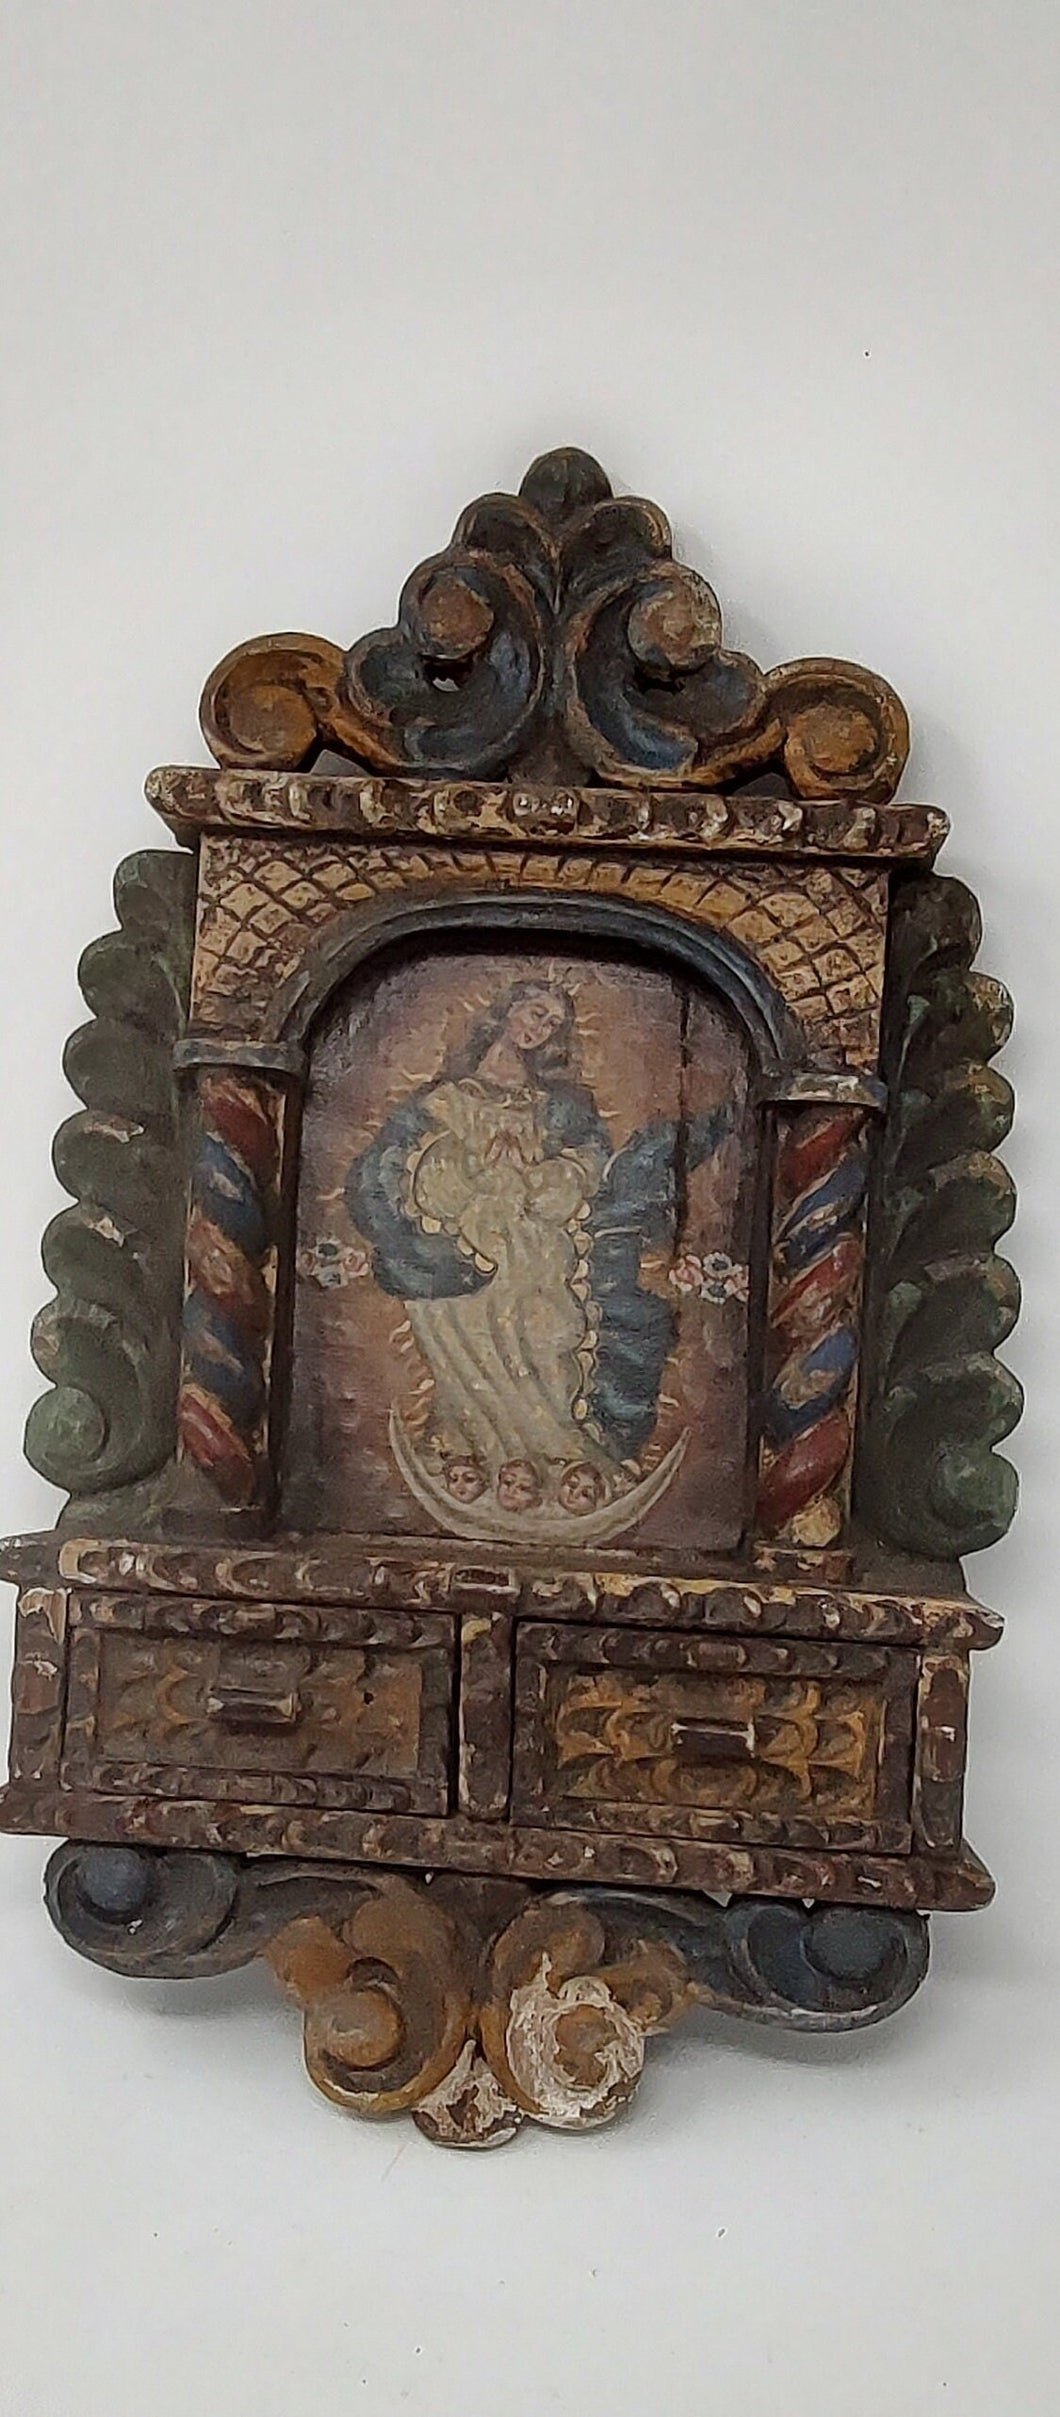 Antique Cuzco Retablo With 2 Drawers. Very old Piece, as is.